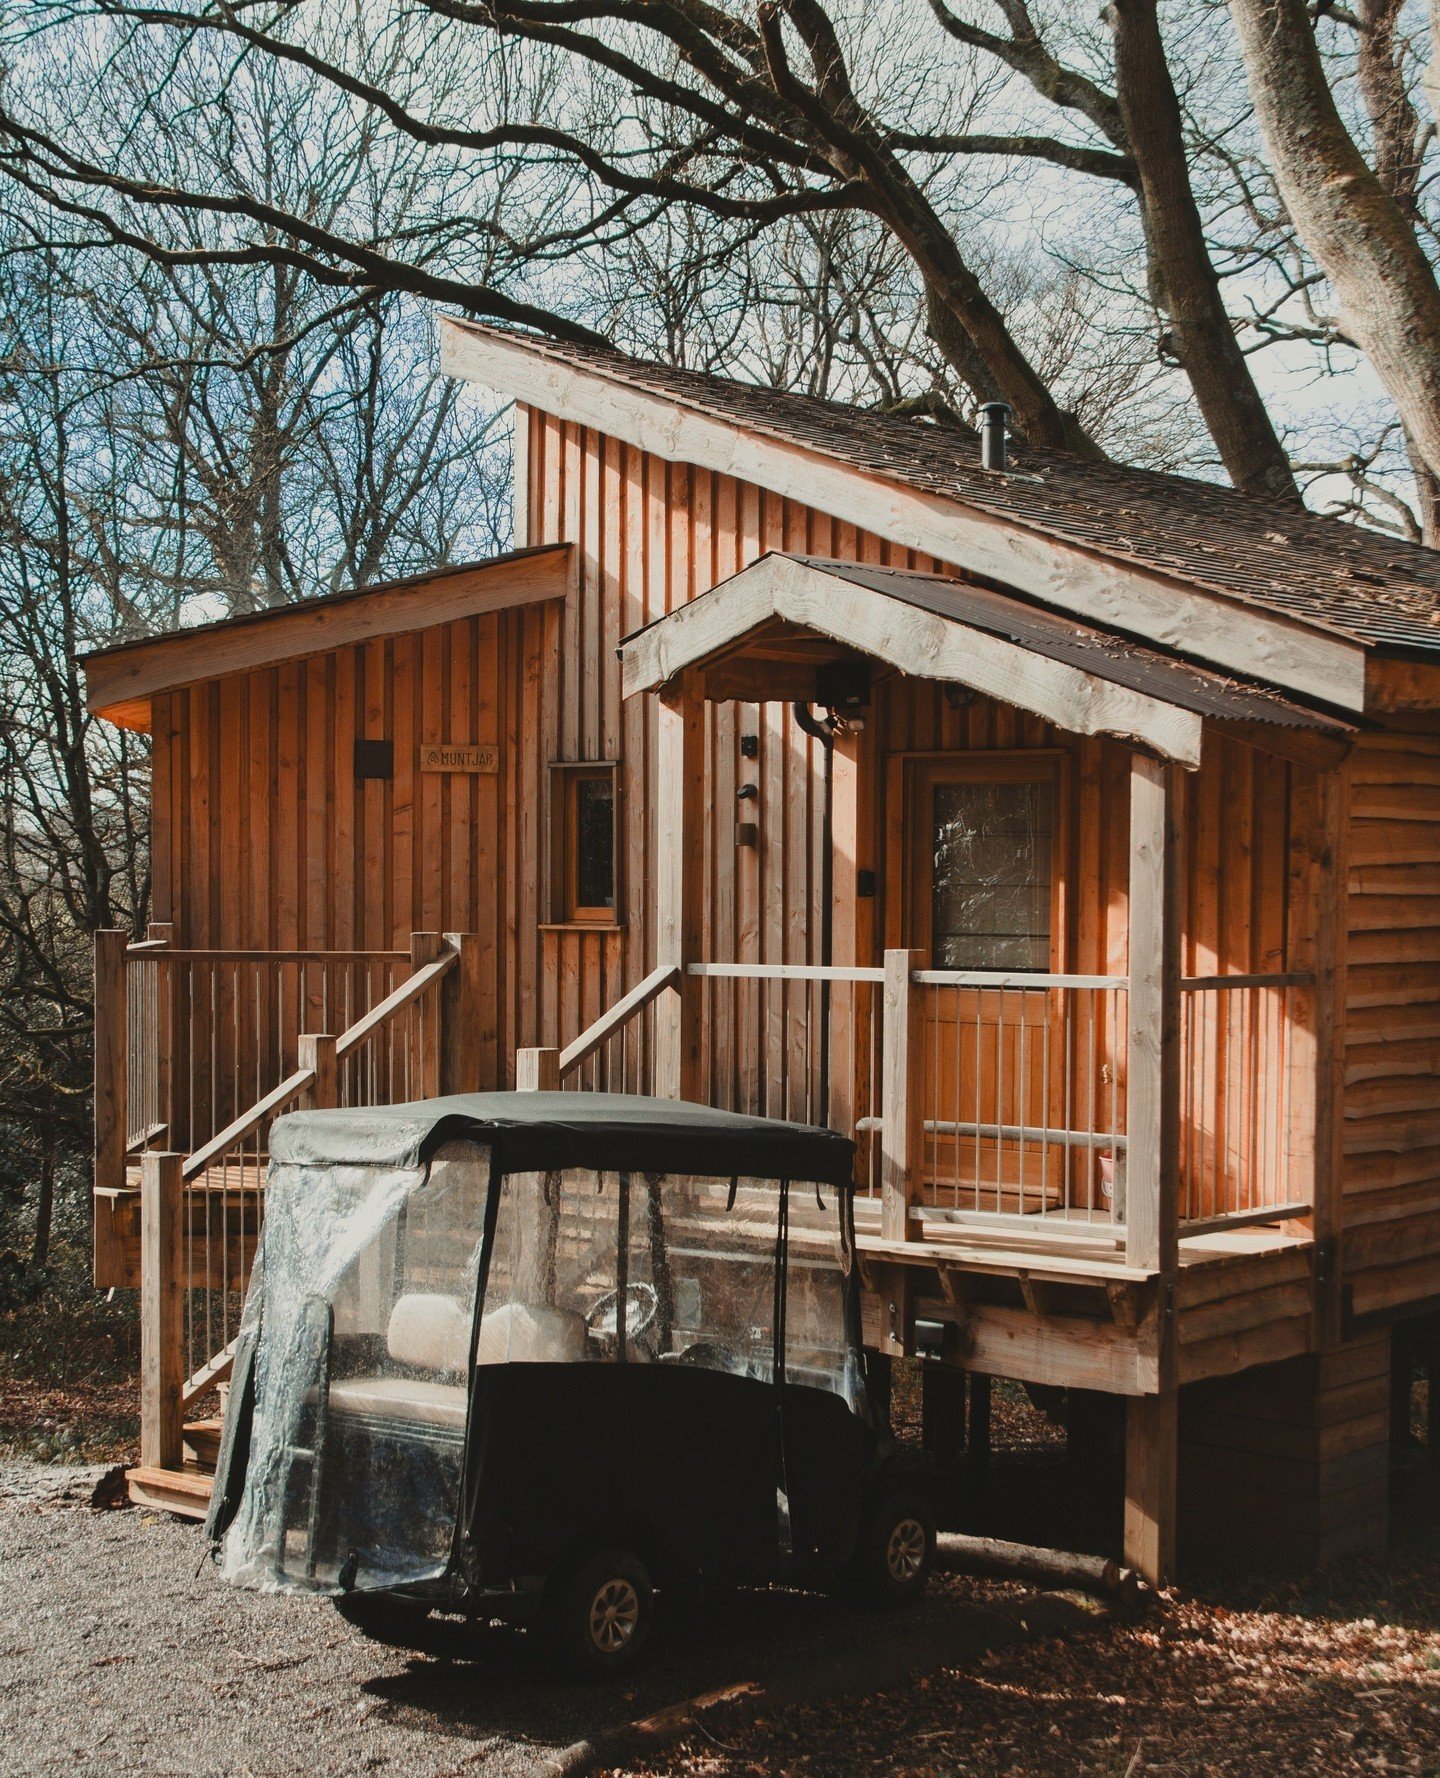 Scroll to take a look inside our treehouses 👉⁠
⁠
All of our treehouses come with:⁠
🛁 Outdoor bath⁠
🌲 Spacious terrace ⁠
🛏️ Super-king size bed ⁠
💻 Smart TVs and fast Wi-Fi⁠
🛺 An electric buggy⁠
⁠
🐾 They're also all dog-friendly! And this month